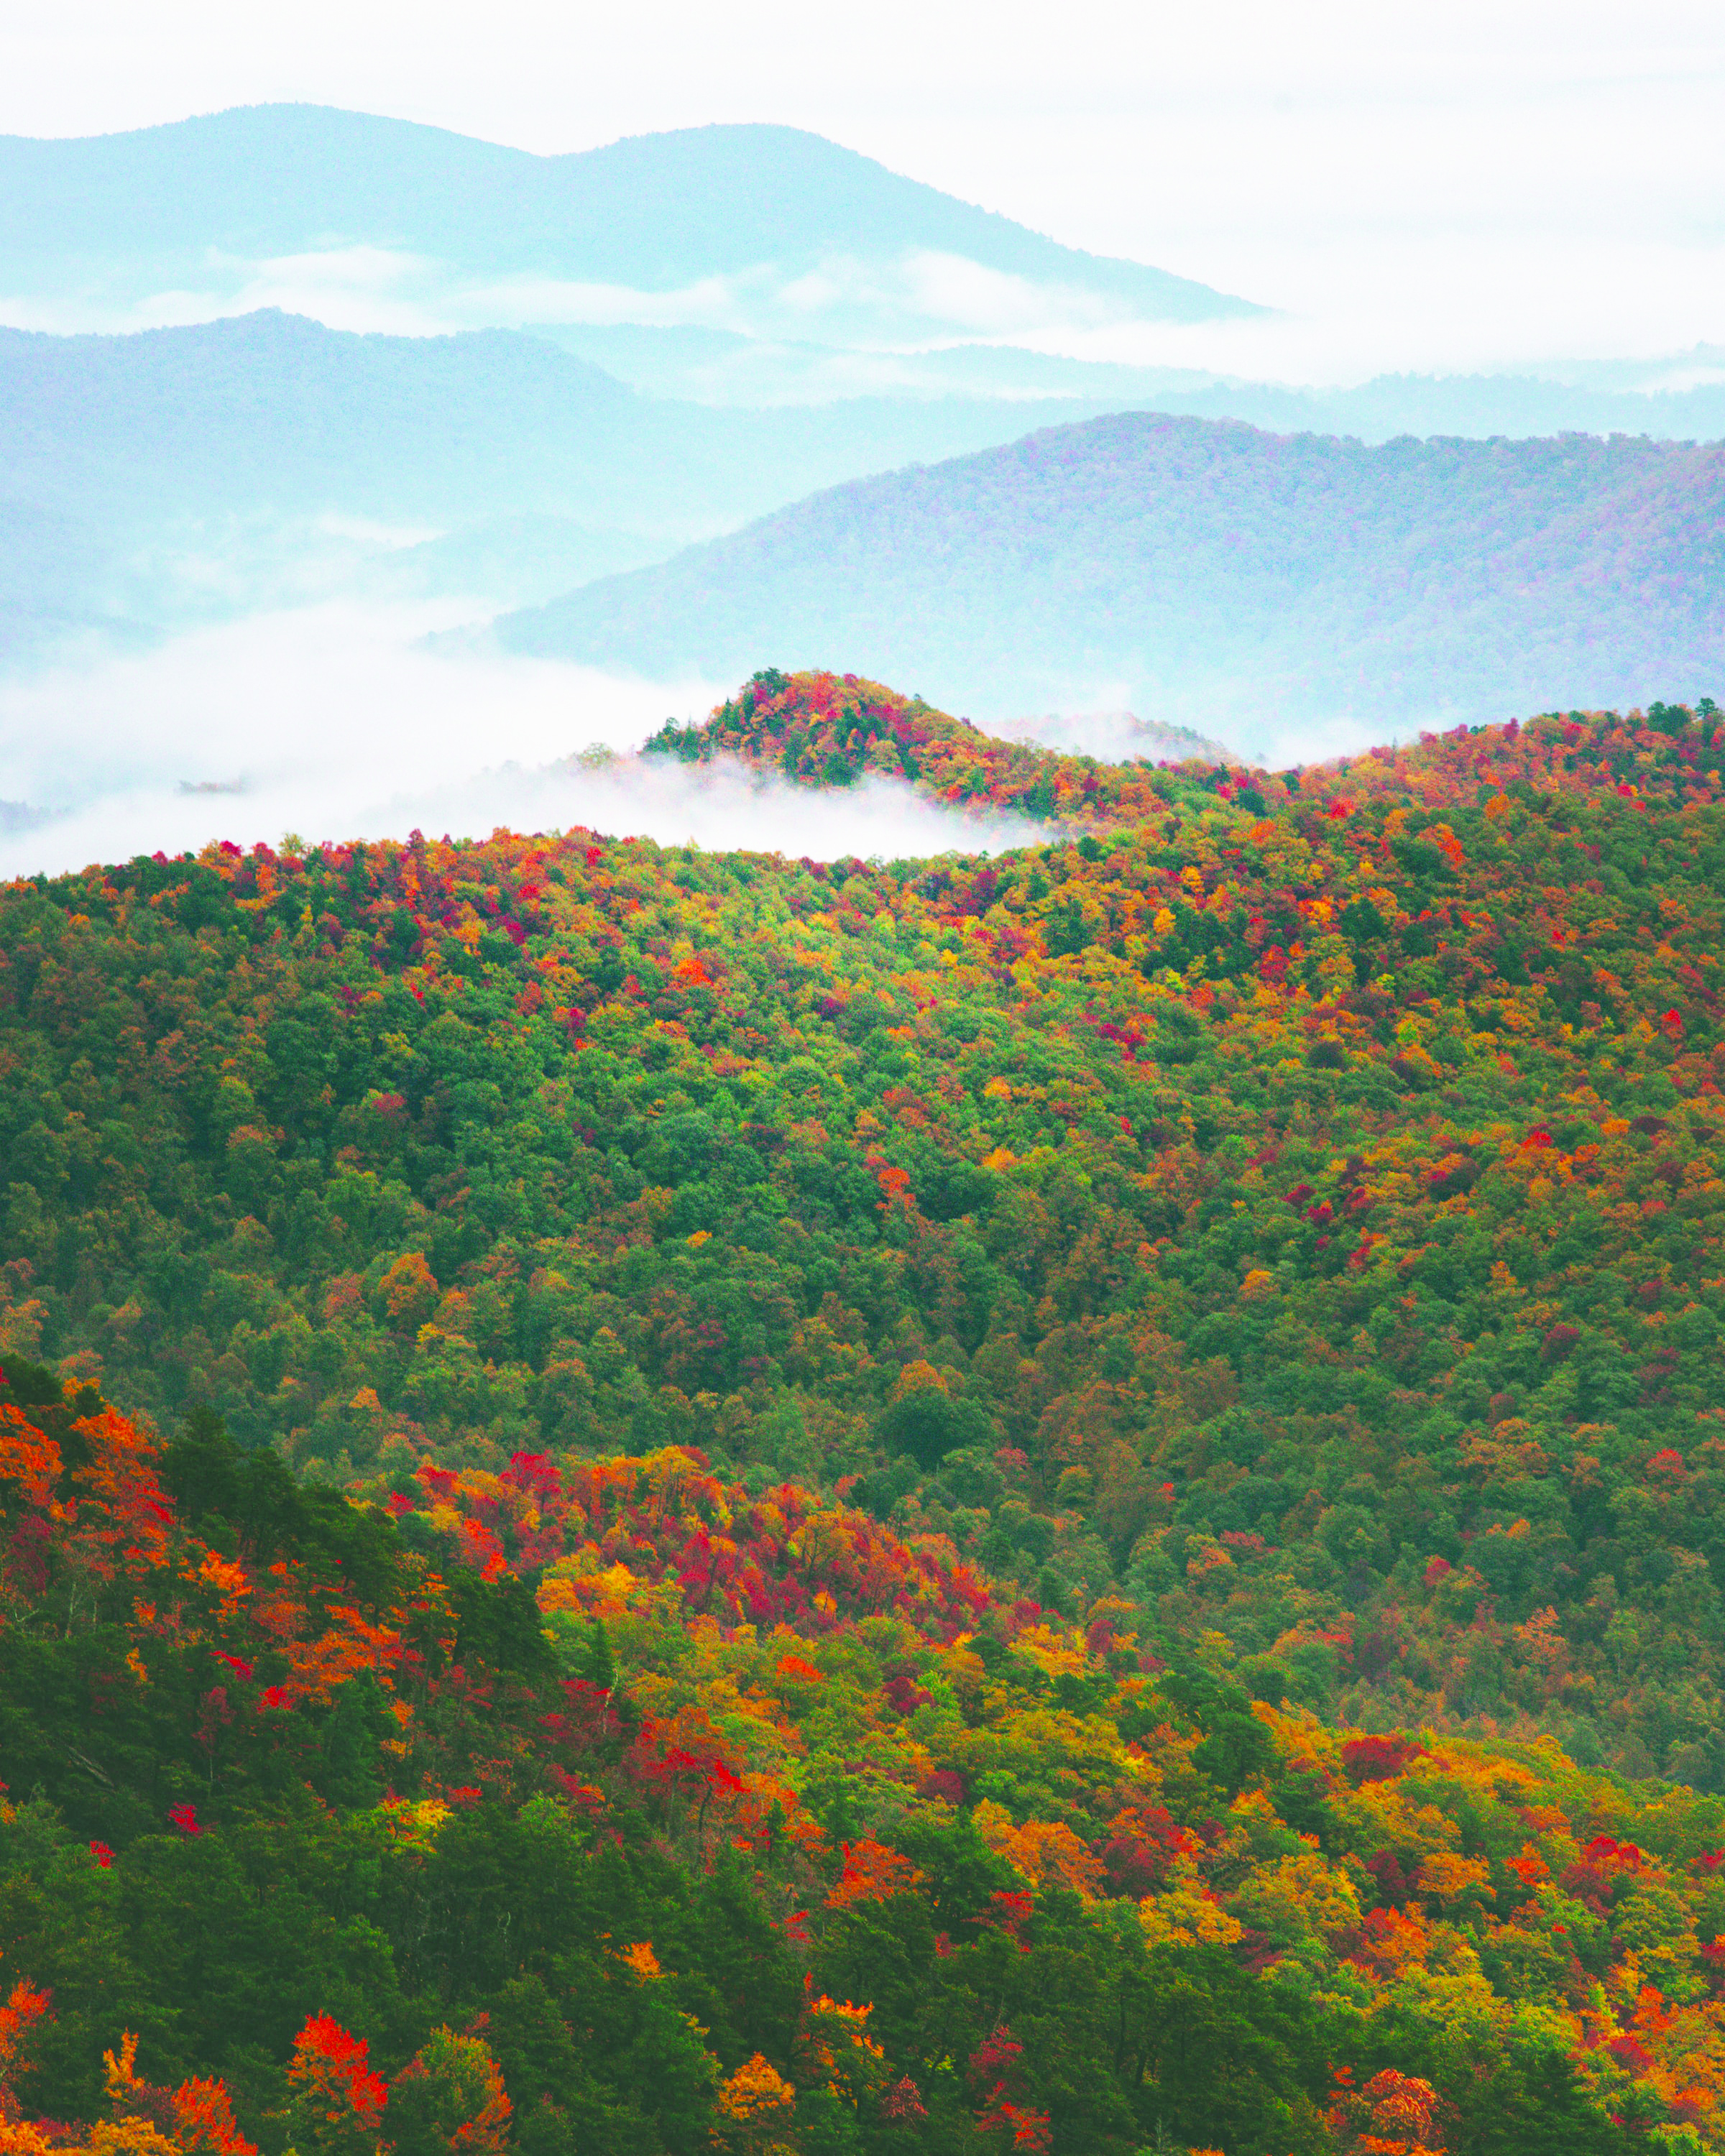 Enjoy Virginia’s peak colors with fall foliage driving tour